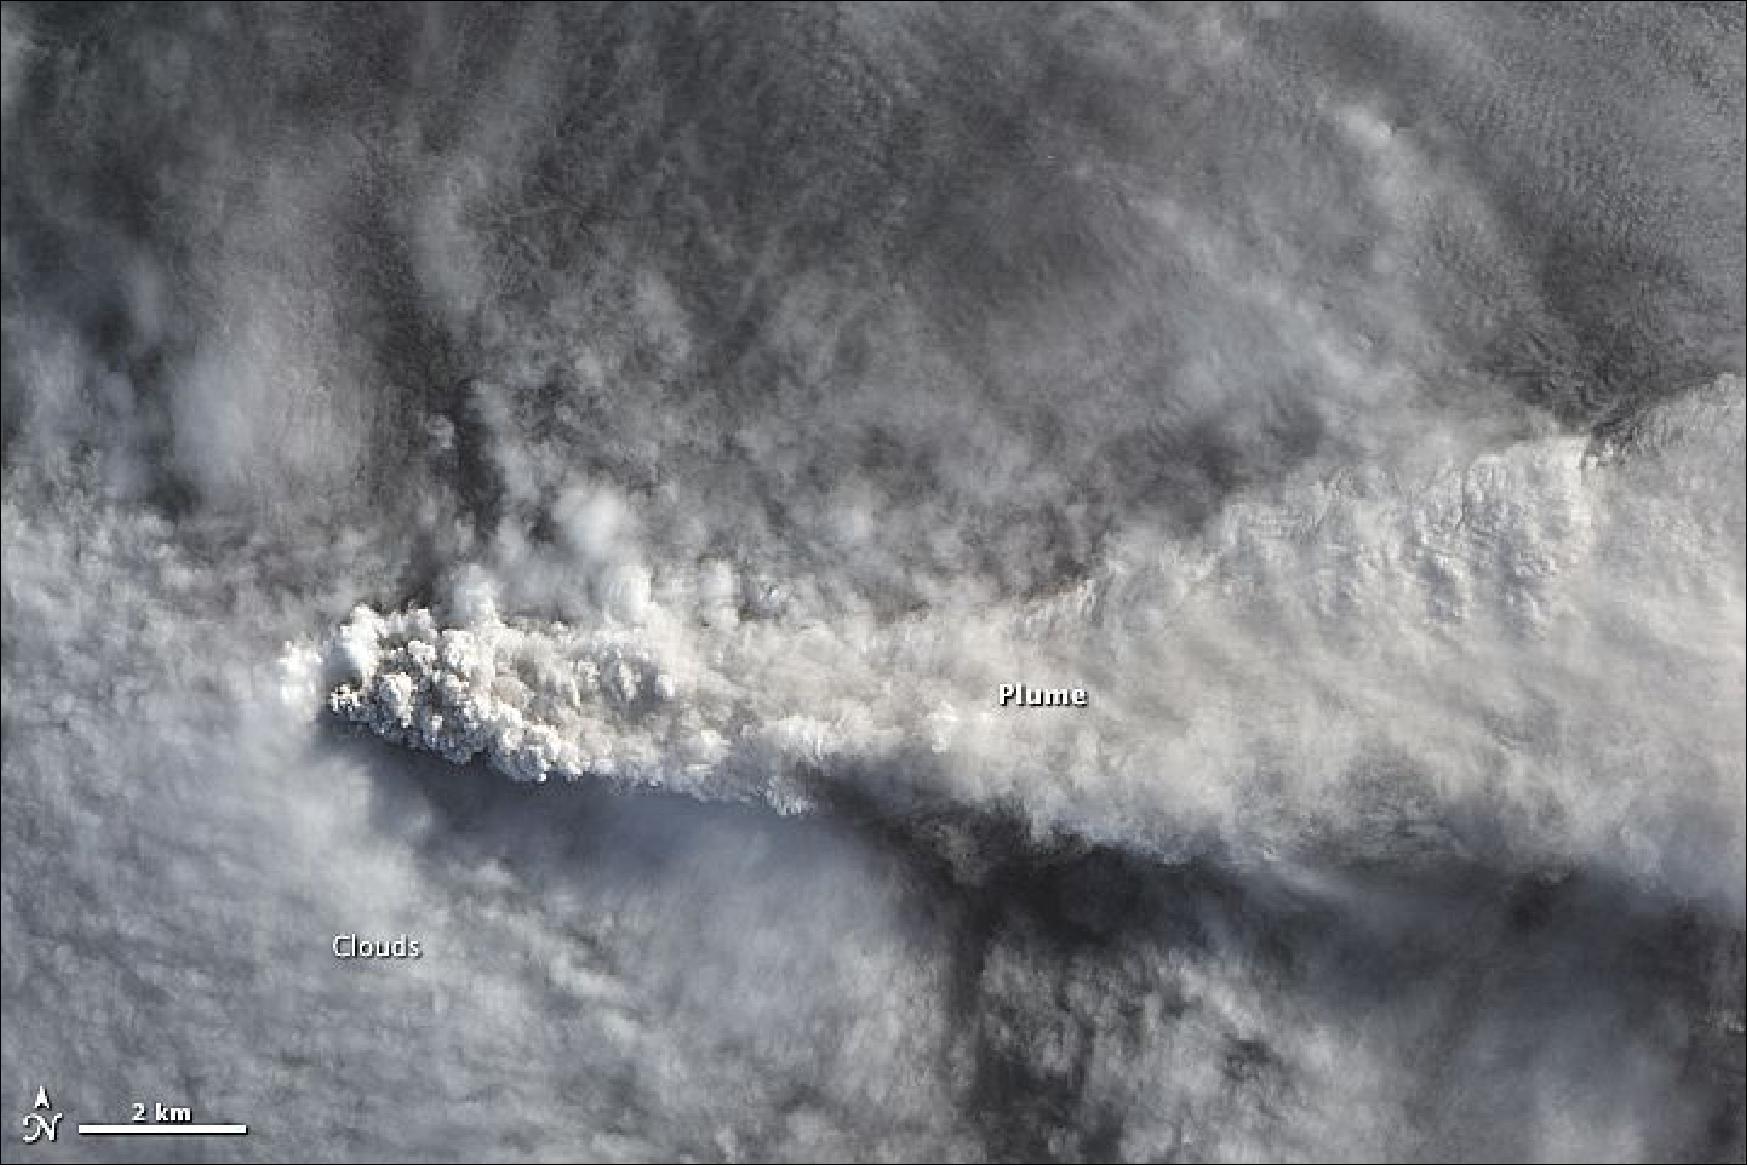 Figure 46: The natural color image, acquired on April 25, 2015 by the ALI (Advanced Land Imager) instrument on NASA’s EO-1 (Earth Observing-1) satellite, shows Calbuco’s plume rising above the cloud deck over Chile (image credit: NASA, EO-1 team)